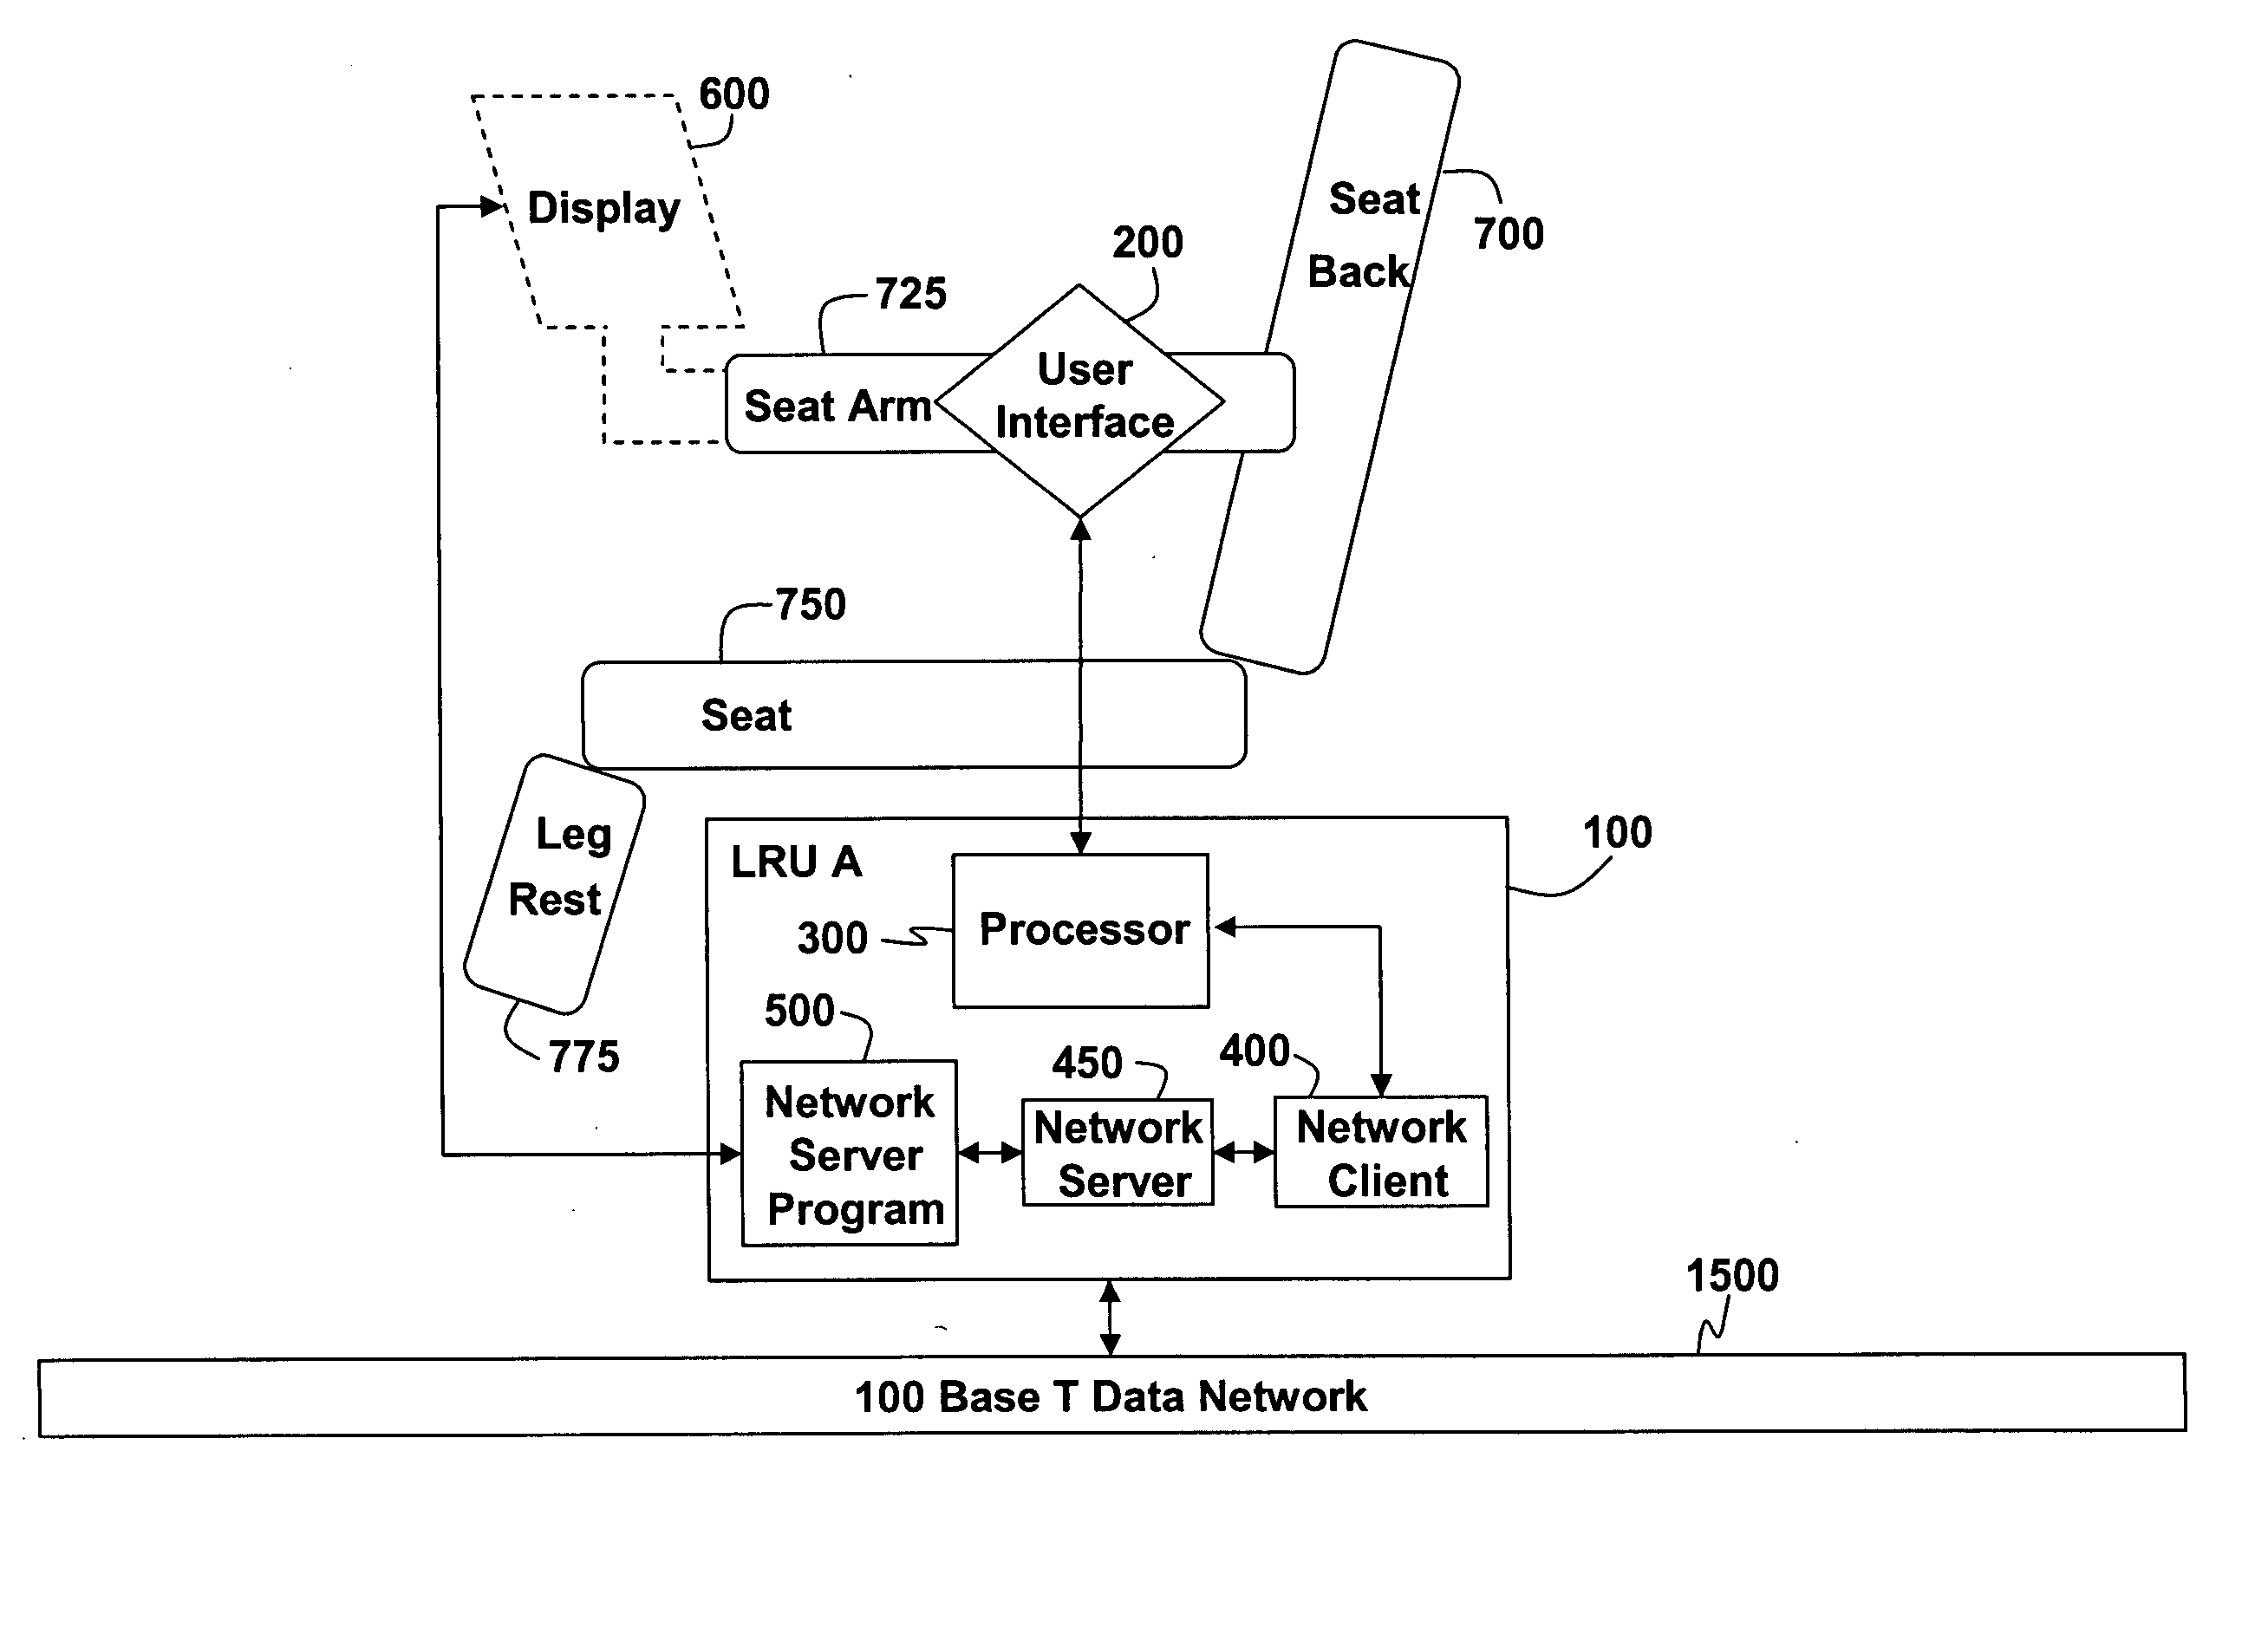 Method for controlling an in-flight entertainment system